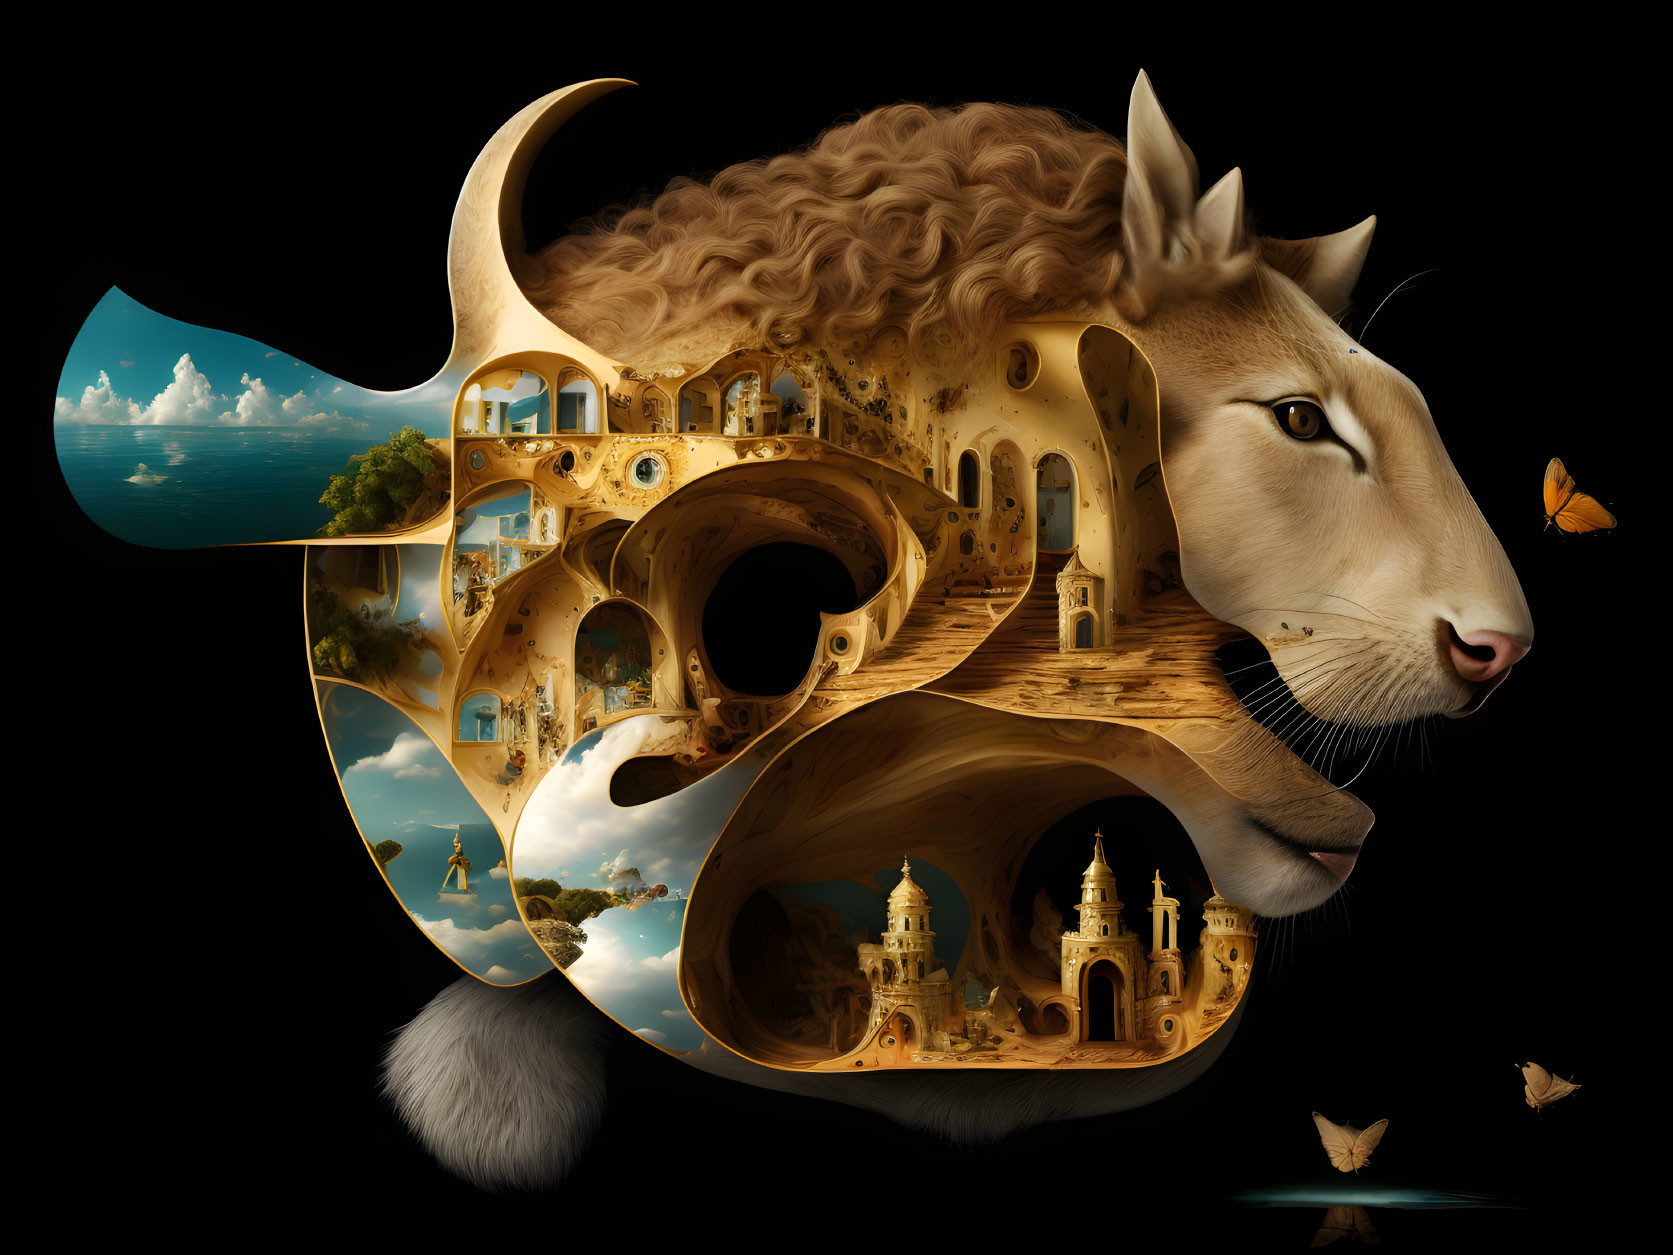 Surreal illustration: Lion's head merges with buildings, archways, and butterflies